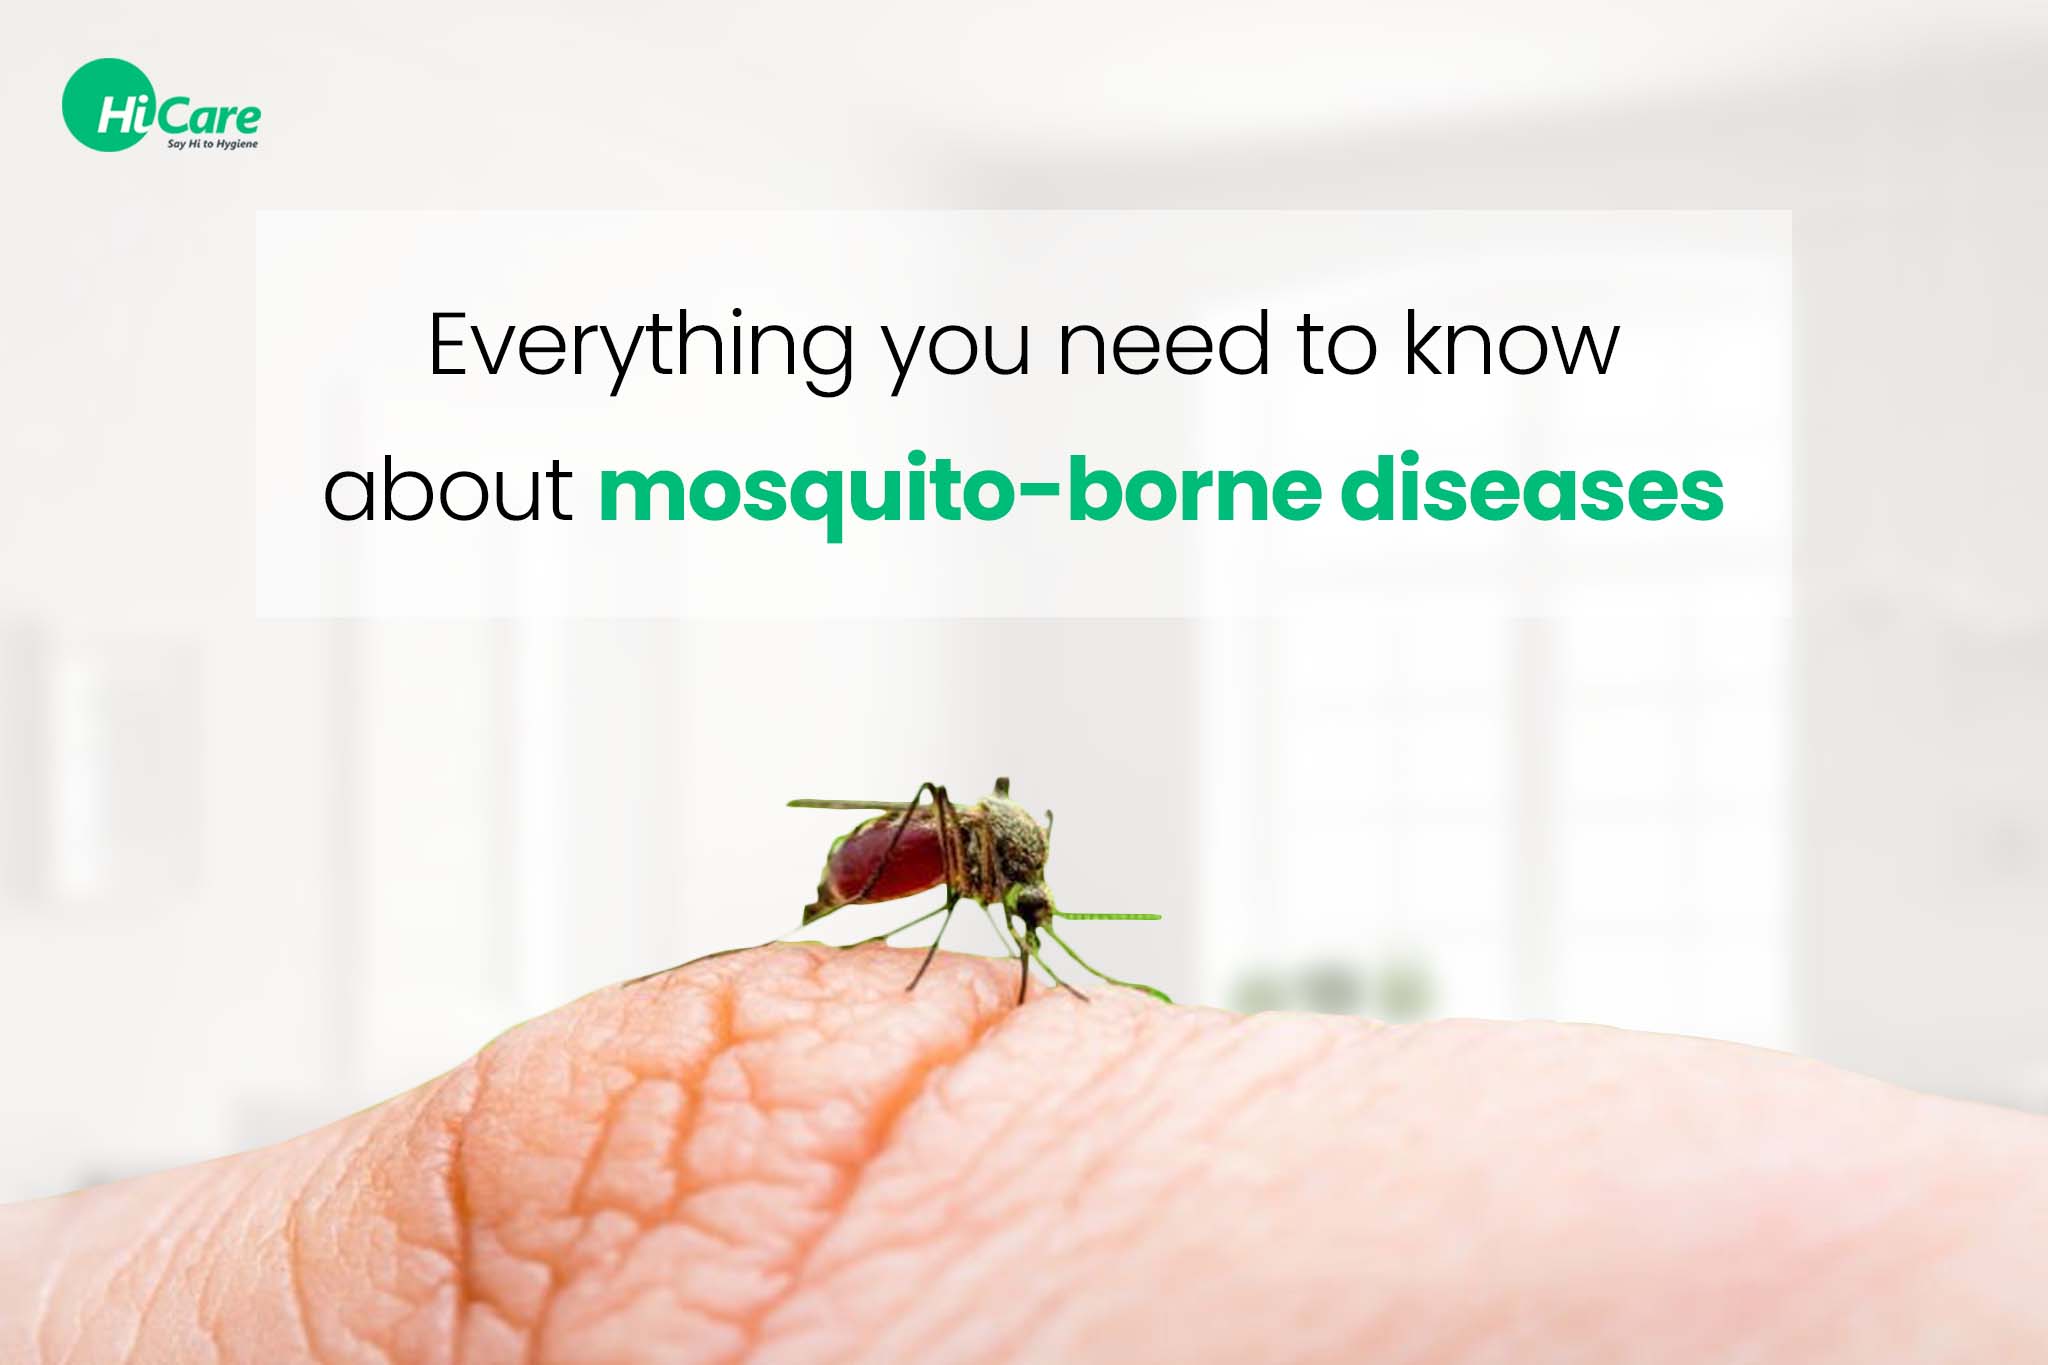 everything you need to know about mosquito-borne diseases